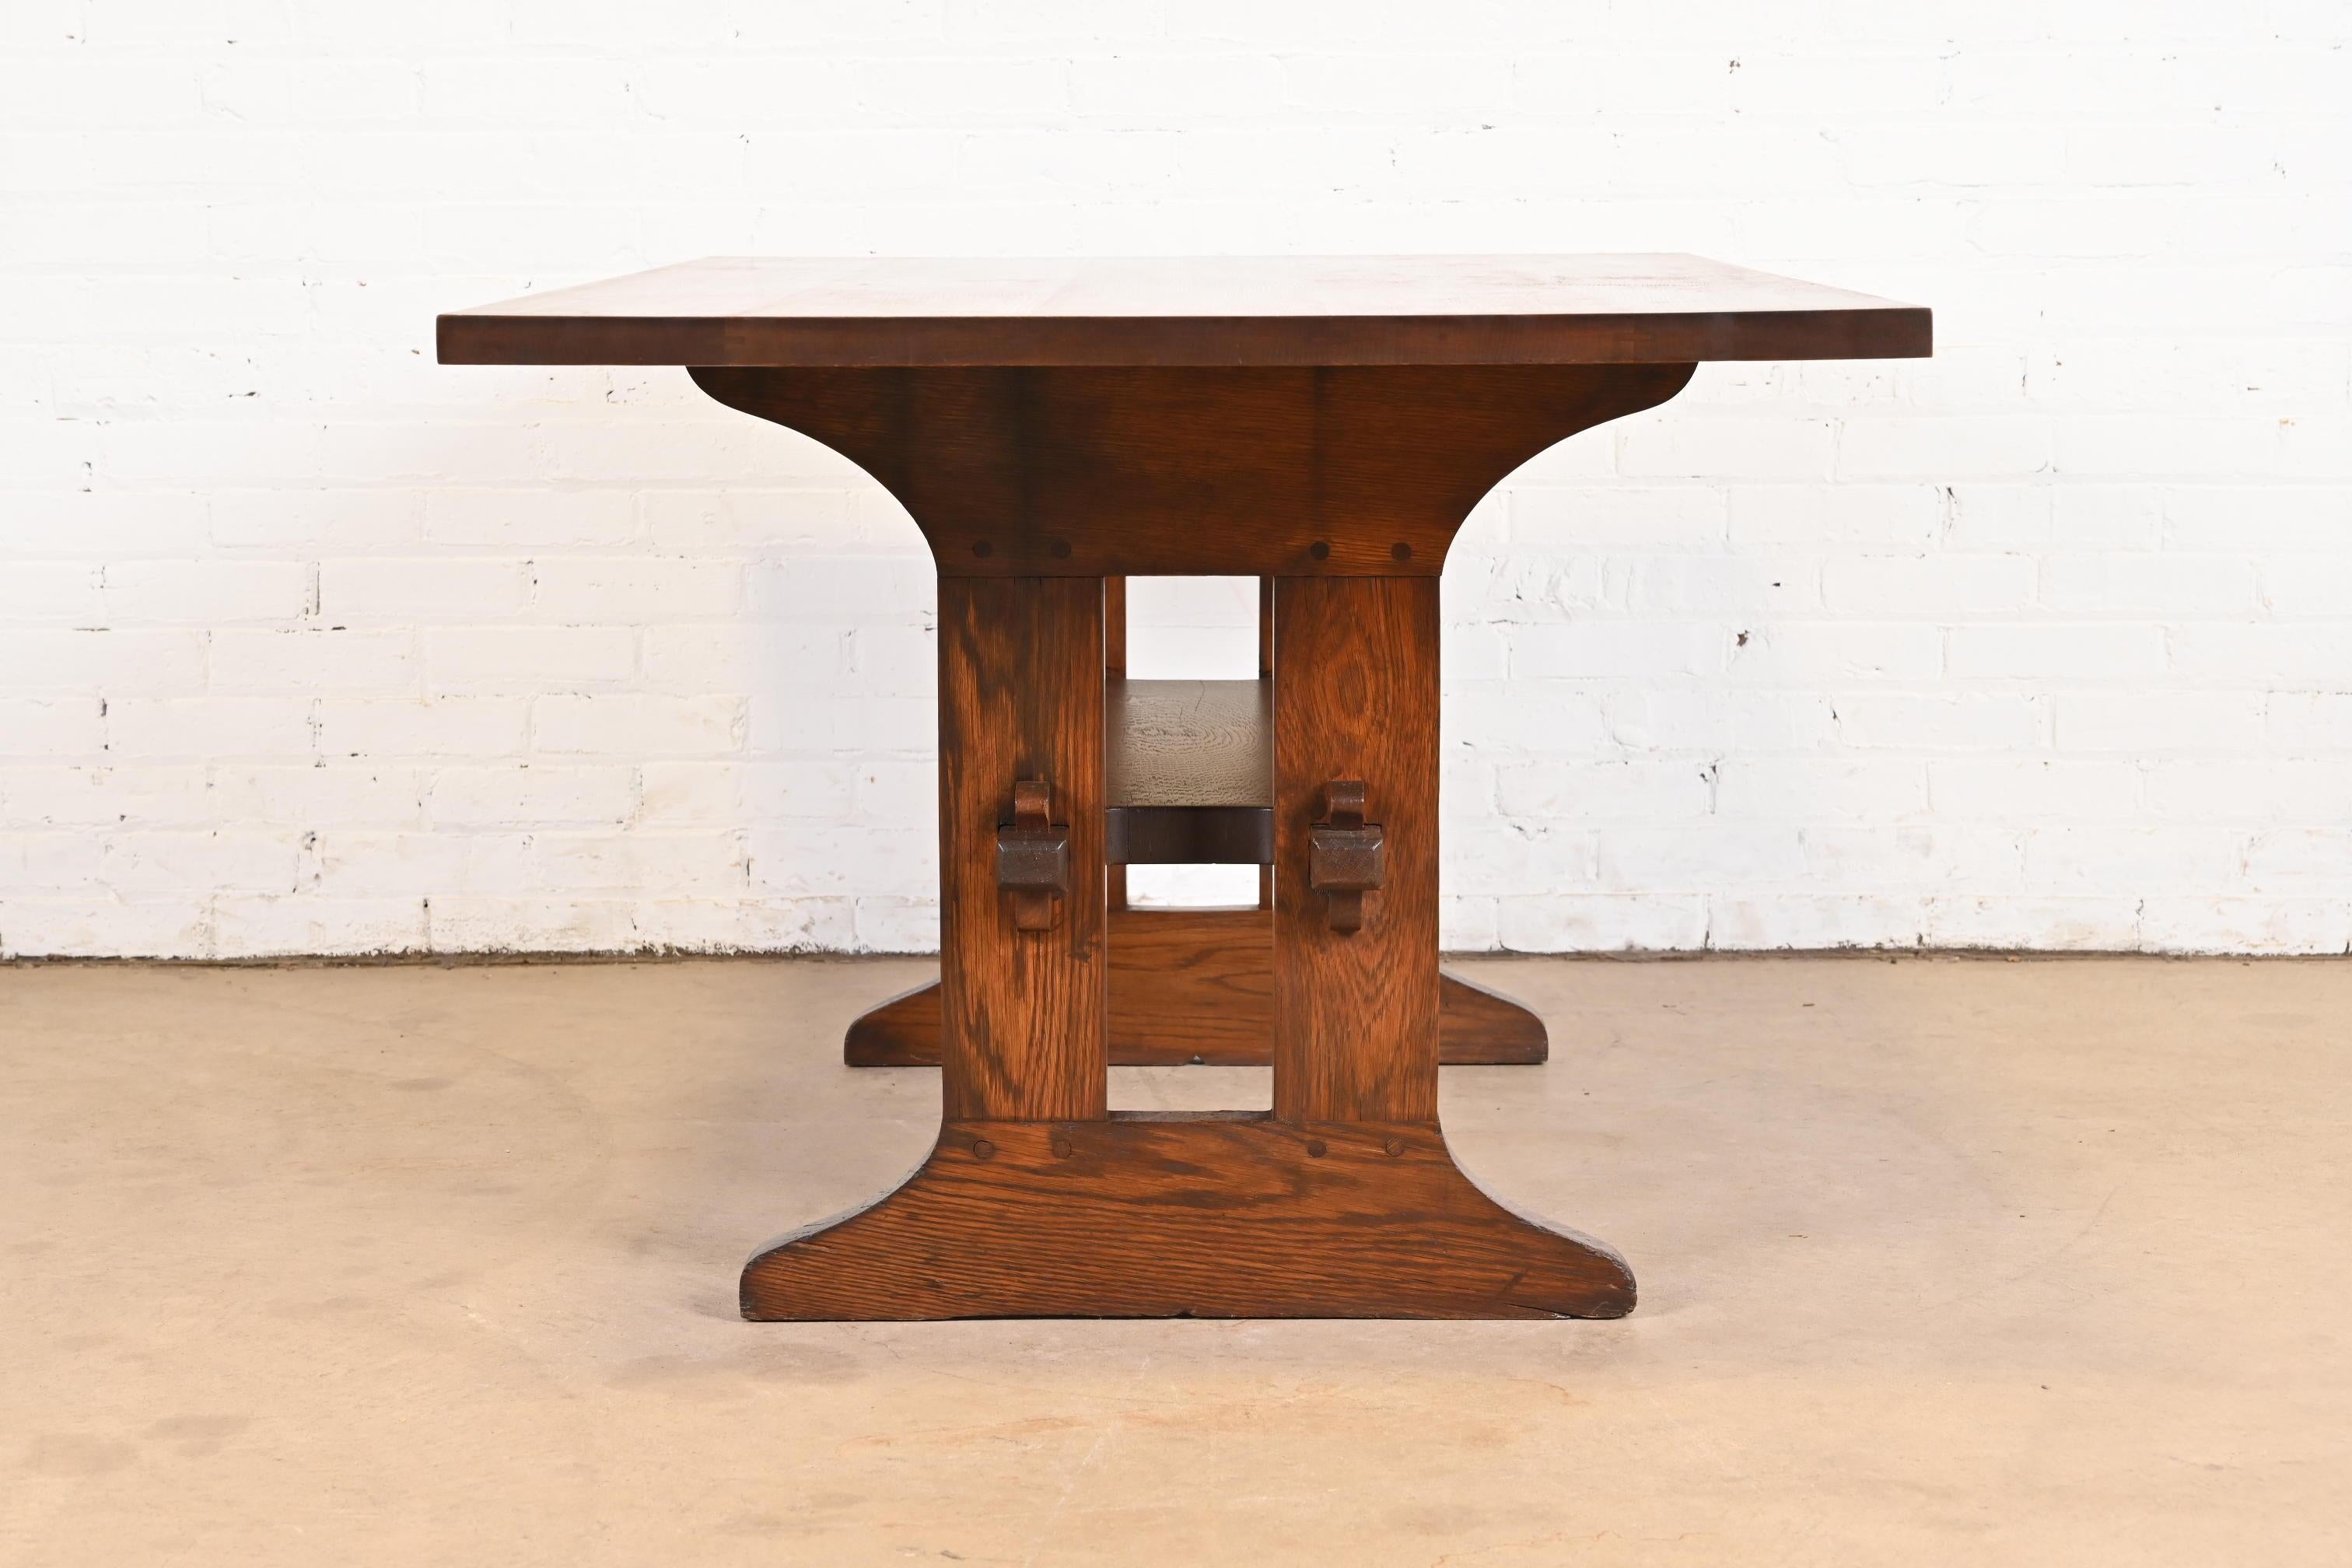  Gustav Stickley Mission Oak Arts & Crafts Trestle Dining Table or Library Table 1